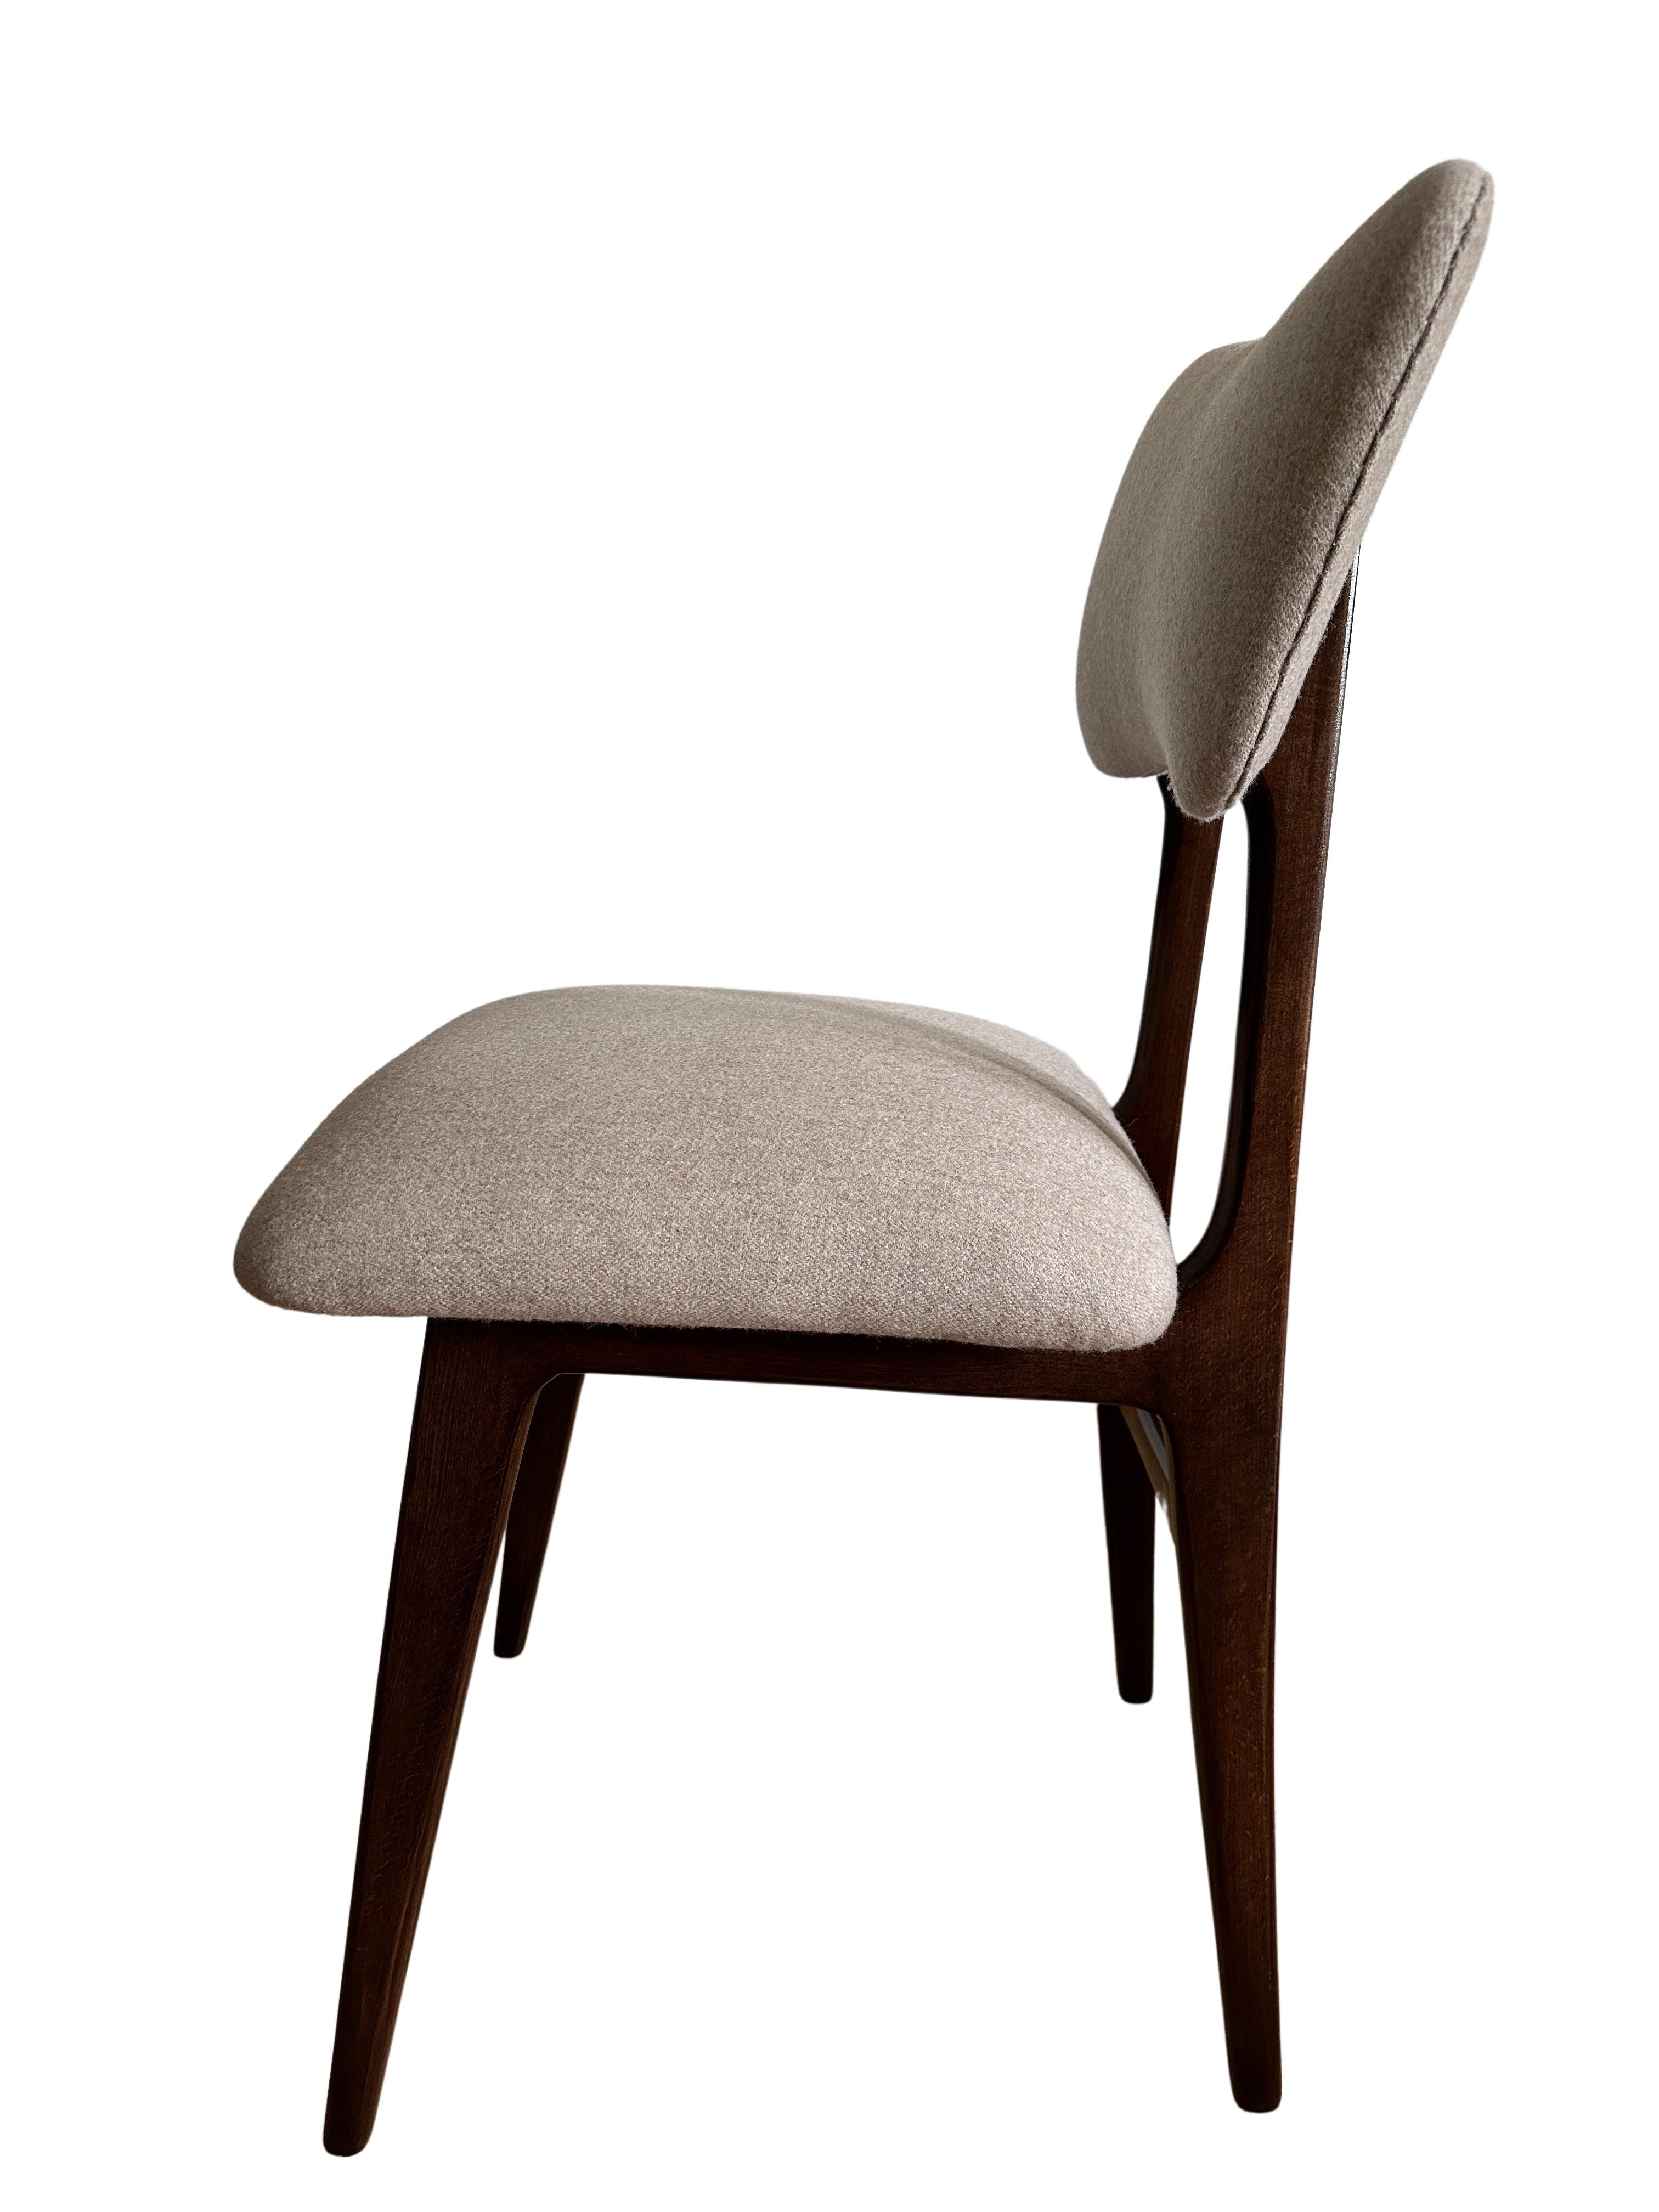 Set of Two Midcentury Dining Chairs in Beige Wool Upholstery, Poland, 1960s For Sale 2